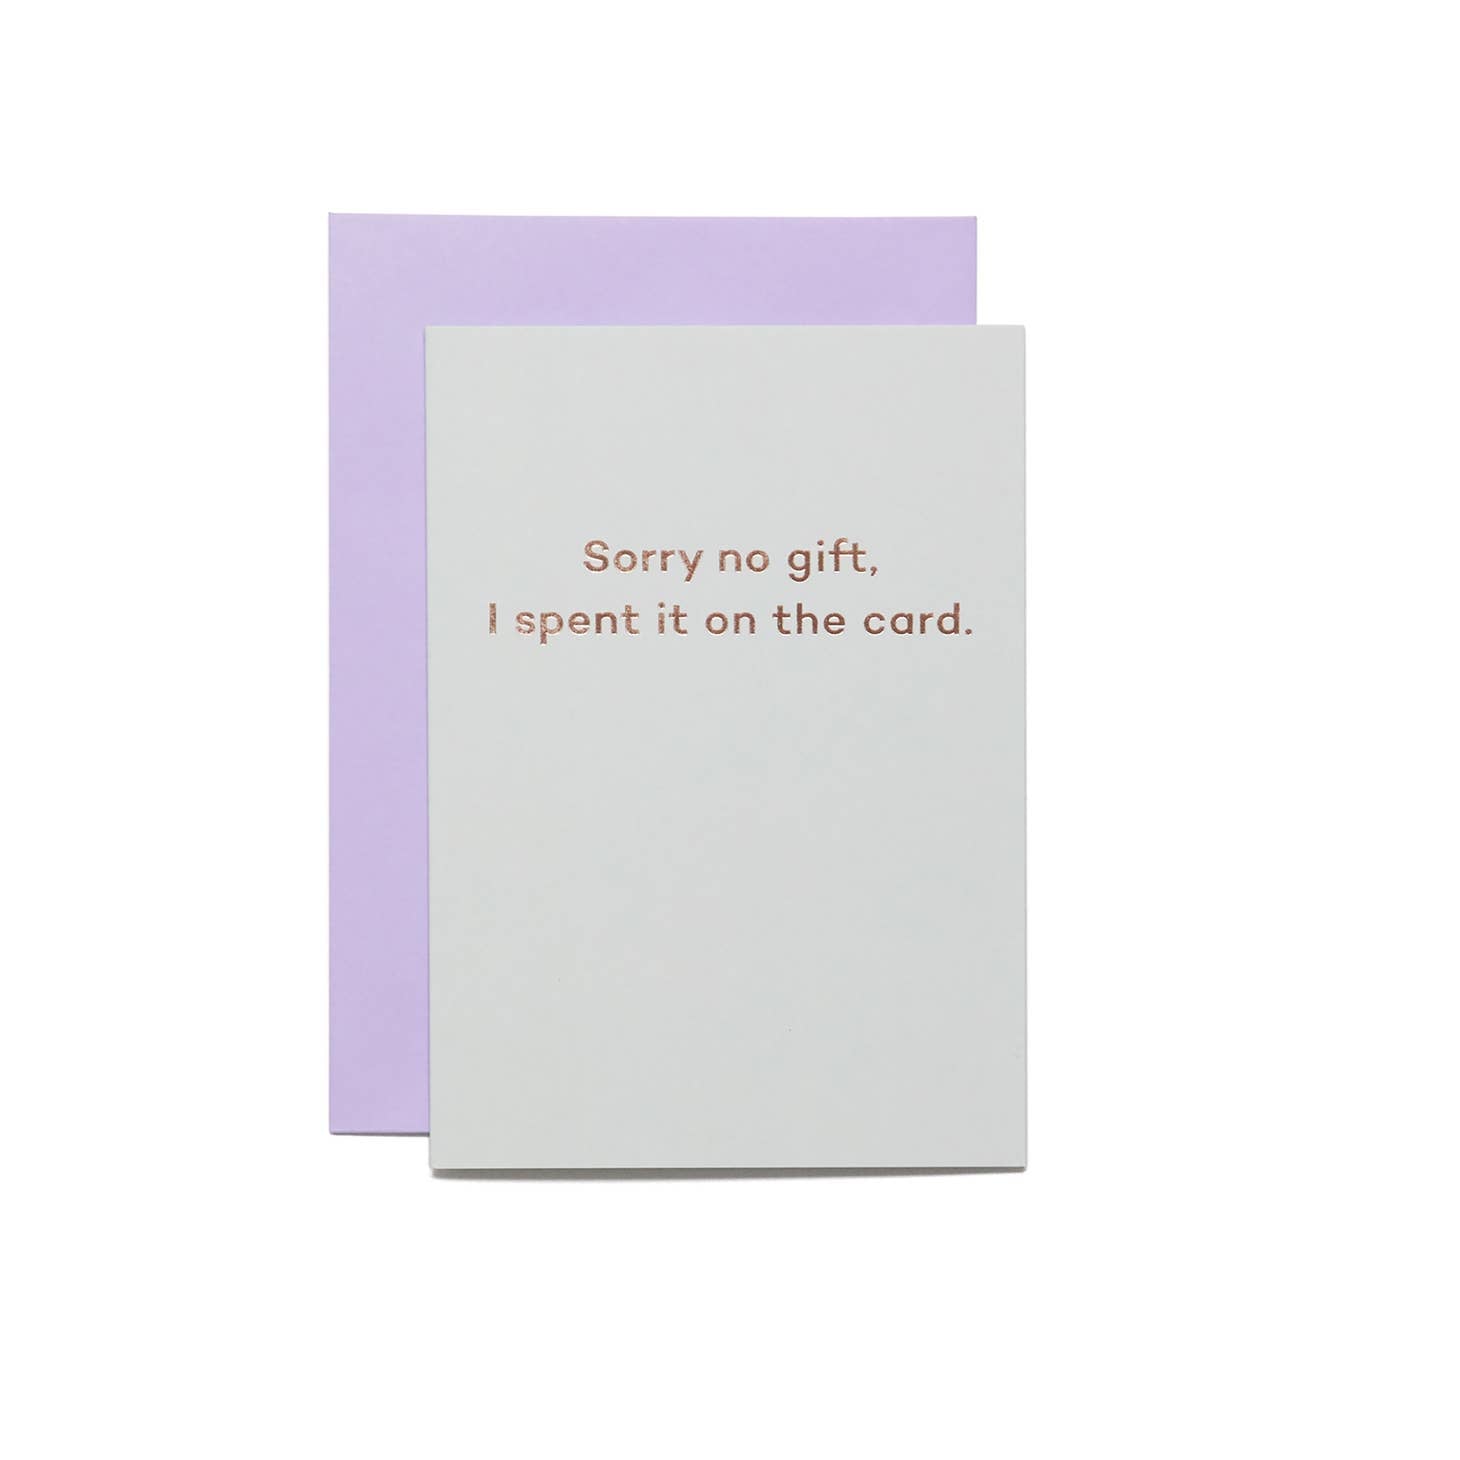 Sorry No Gift, I Spent it on the Card.